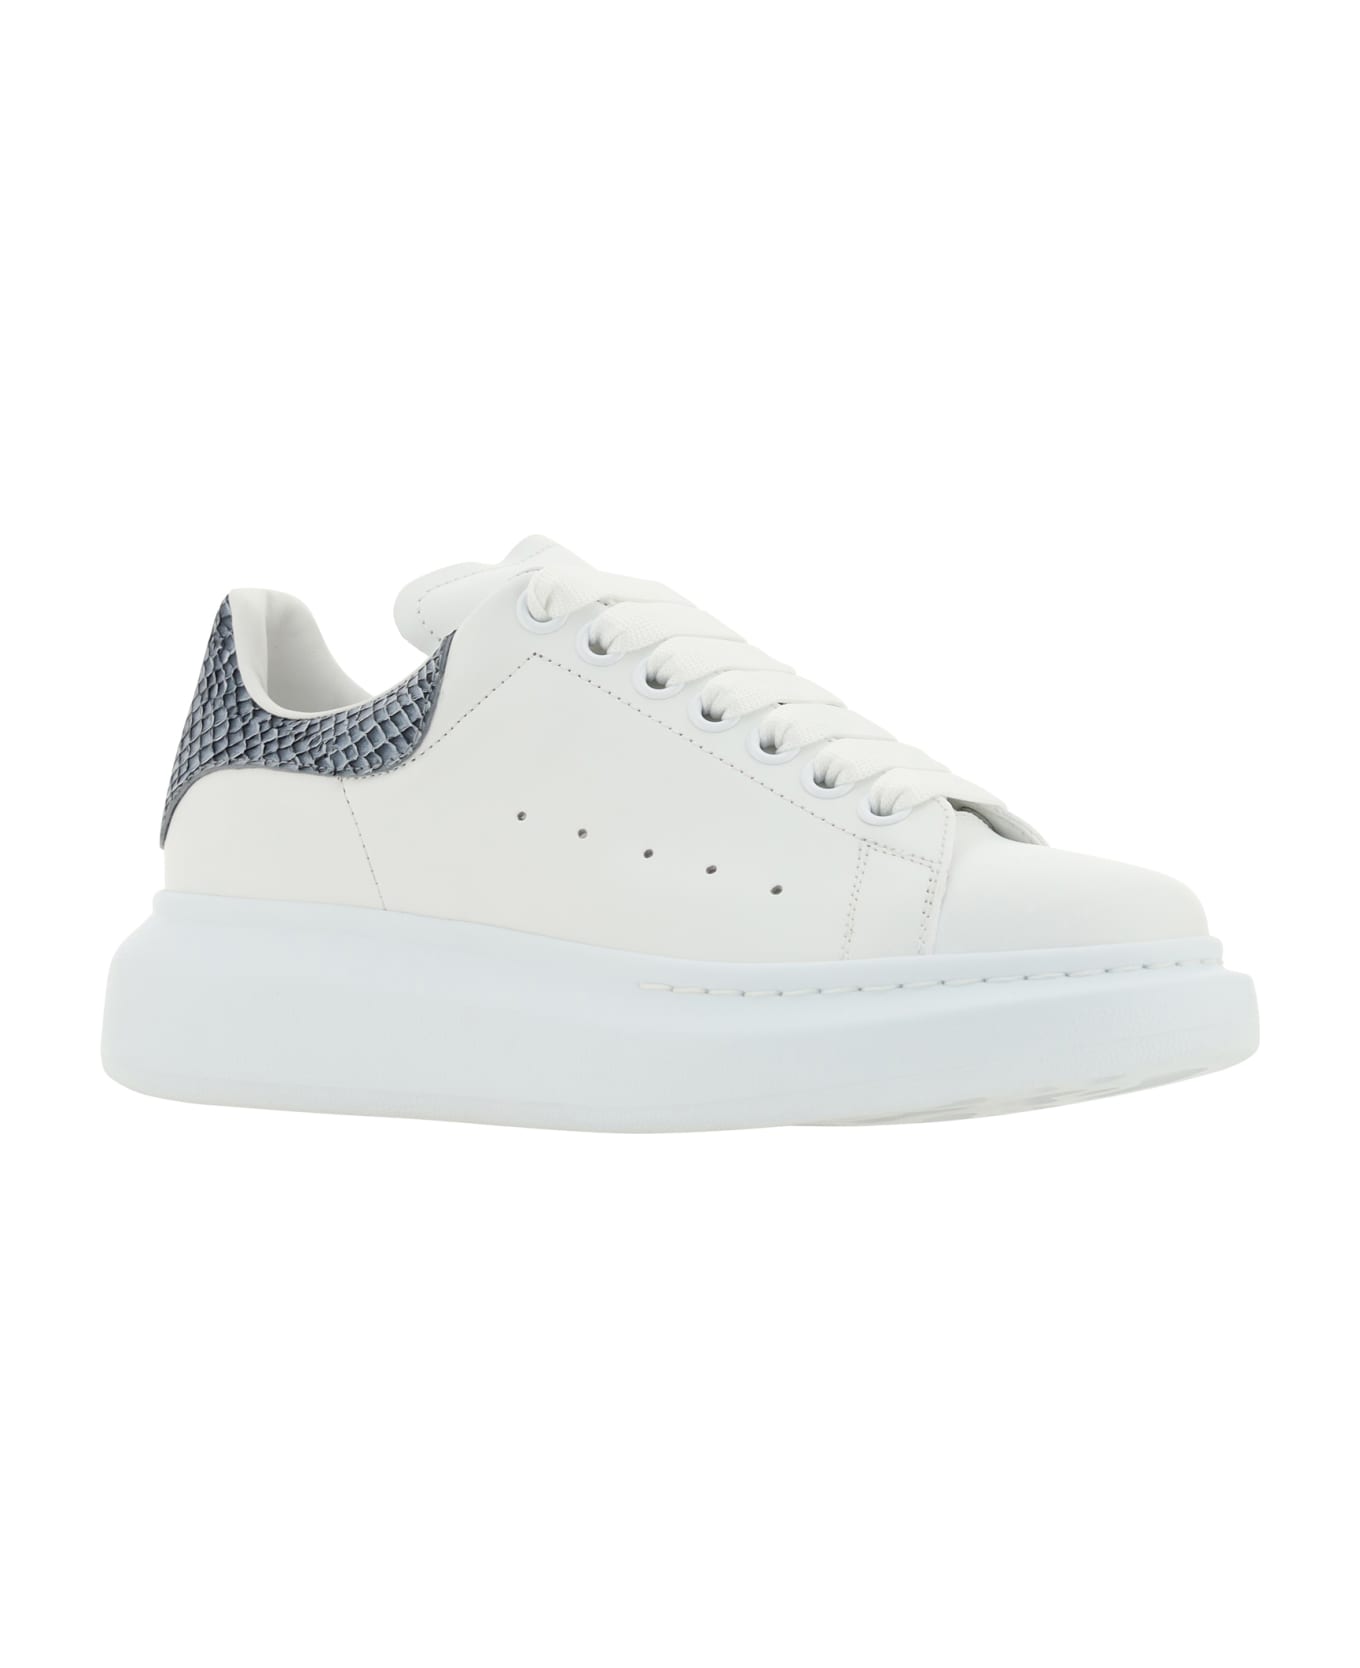 Alexander McQueen White And Ice Oversized Sneakers - Bianco